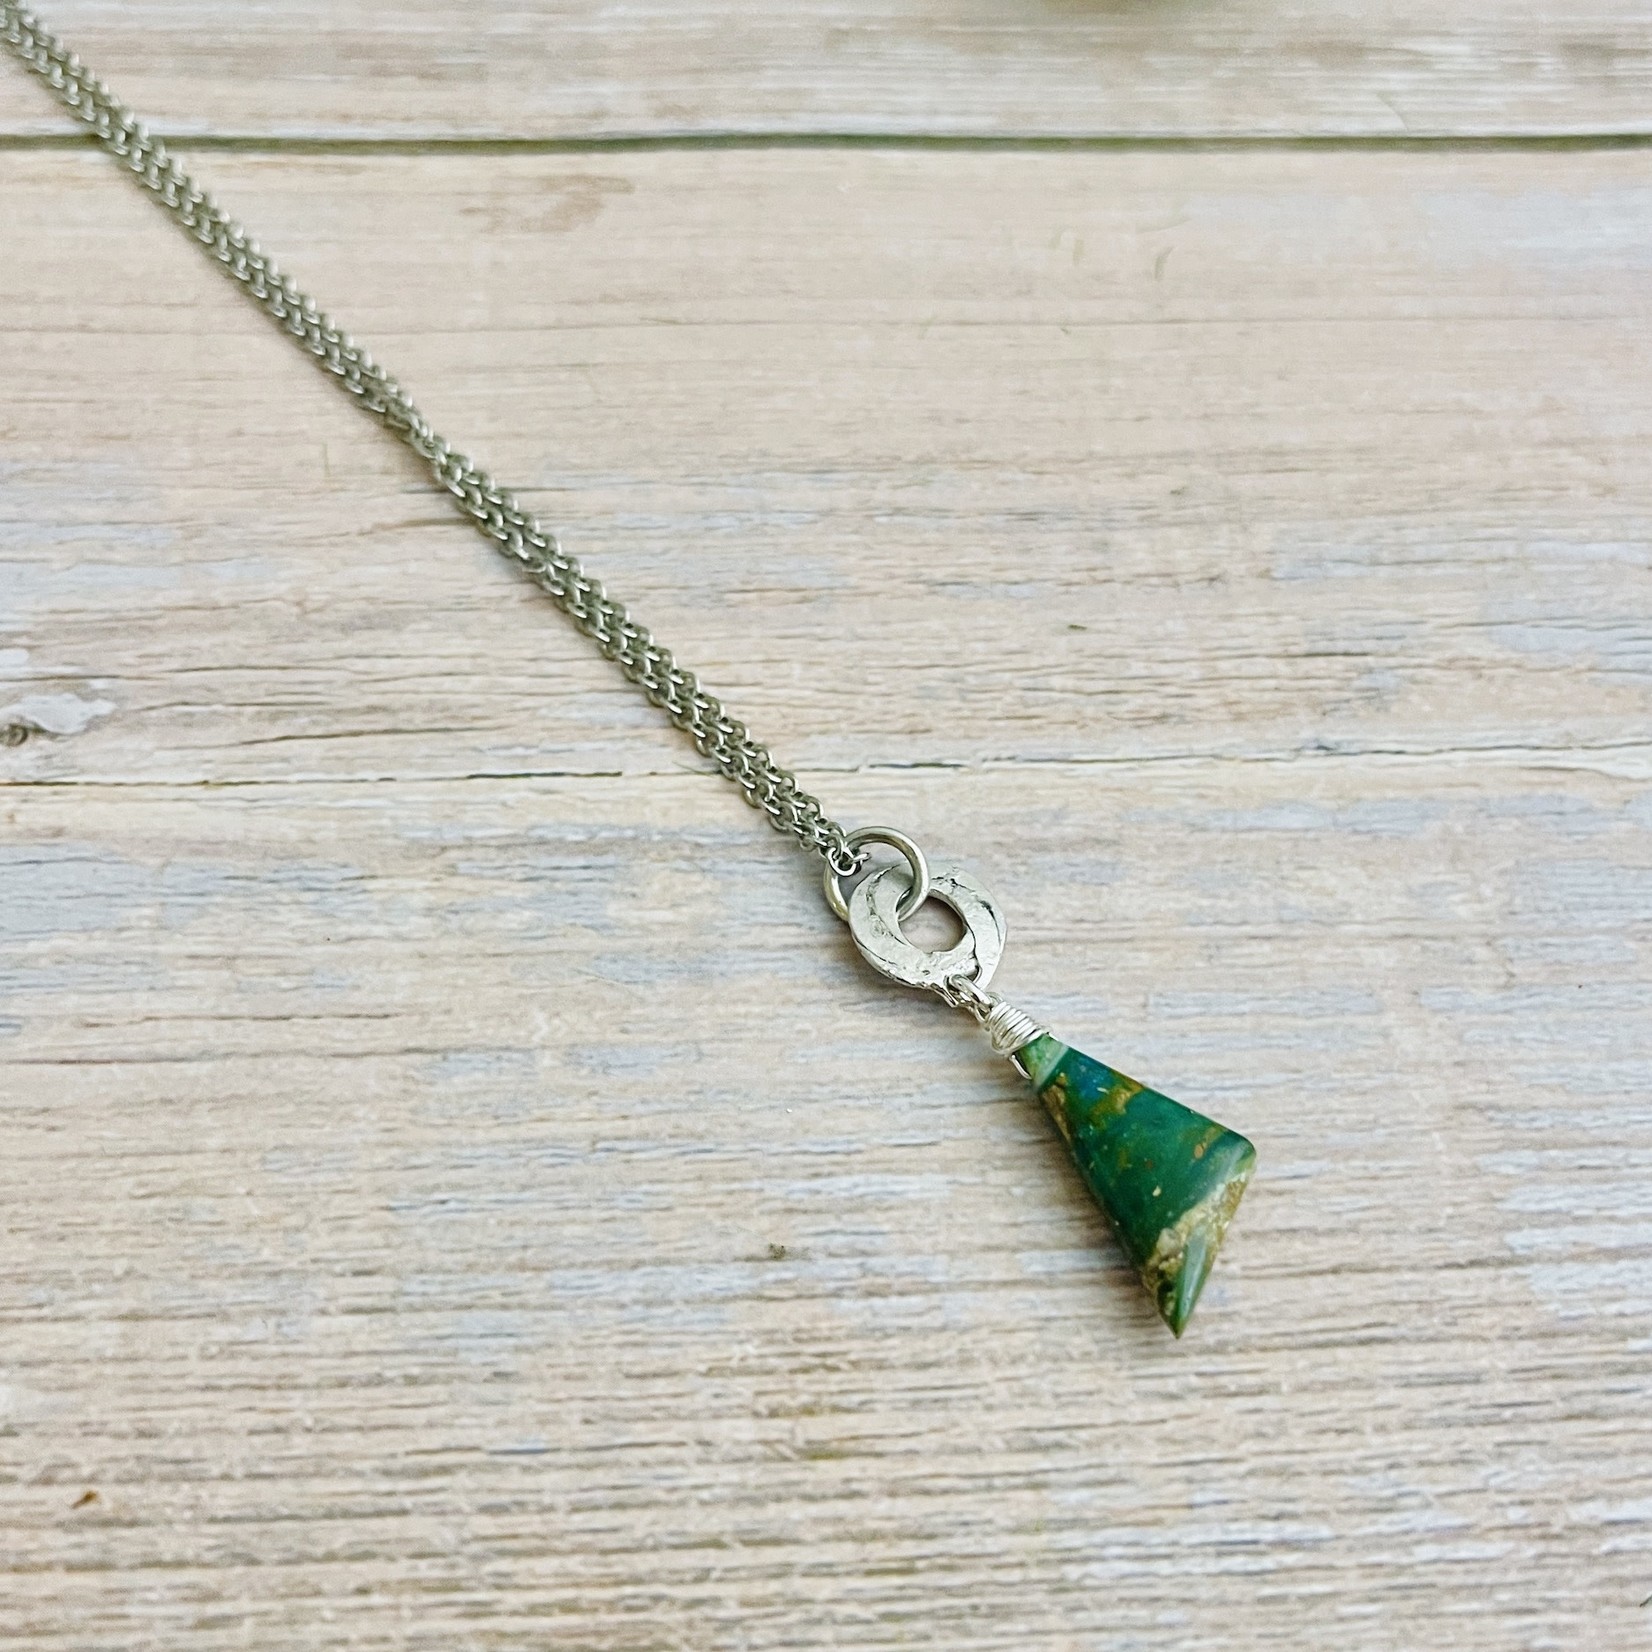 Handmade Silver Necklace with petrified opal on hammered ring